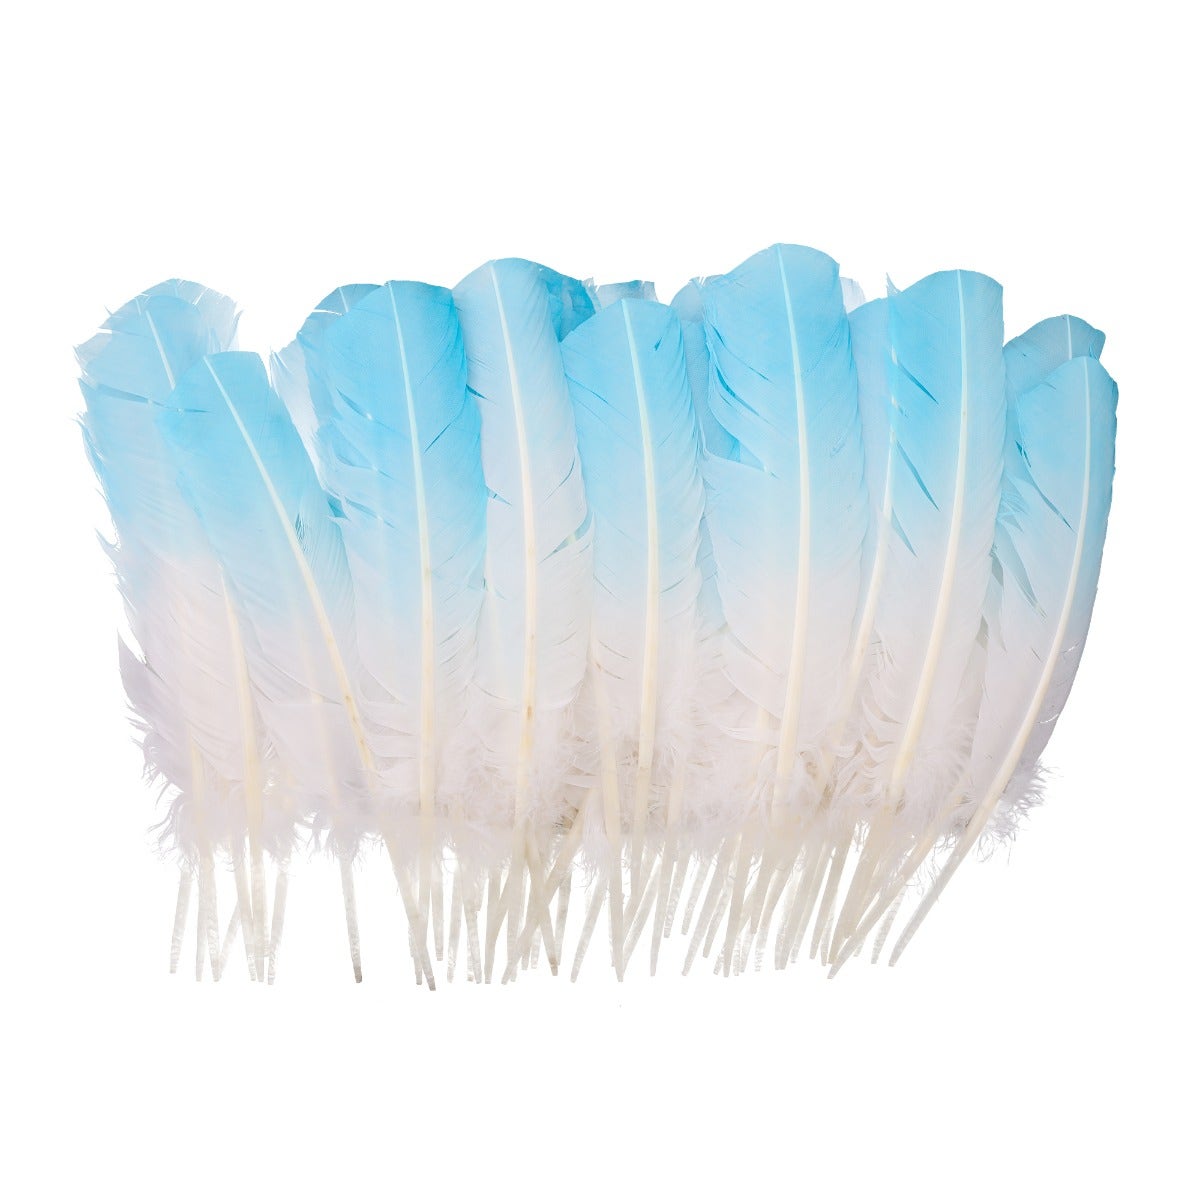 Bulk Two Tone Ombre Tipped Turkey Round Feathers - 10-12” - 1/4 lb - Light Turquoise/White